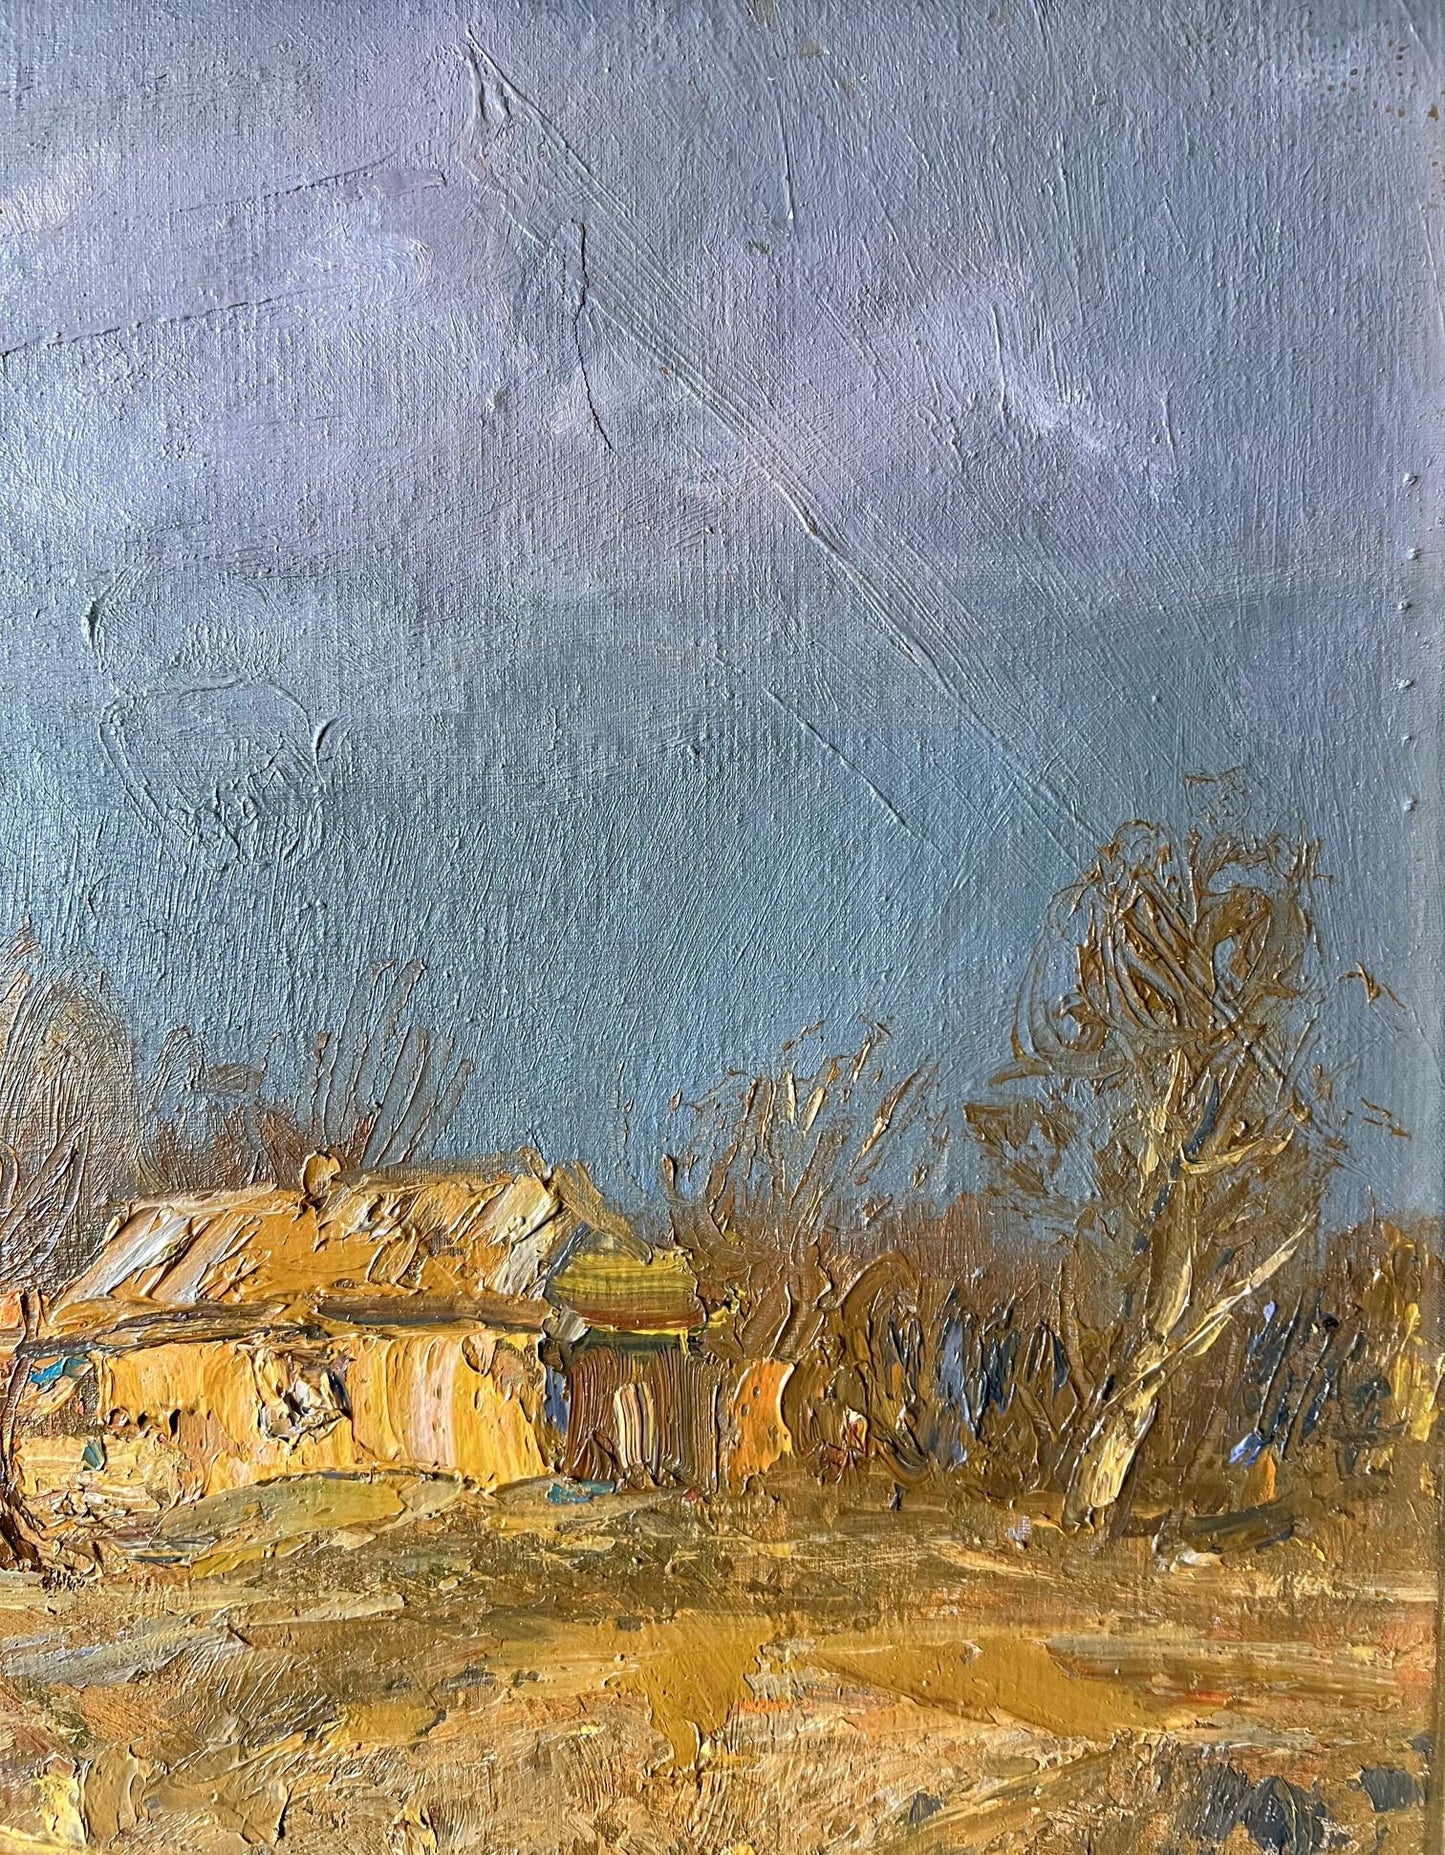 Oil painting The morning after the rain V. Mishurovsky